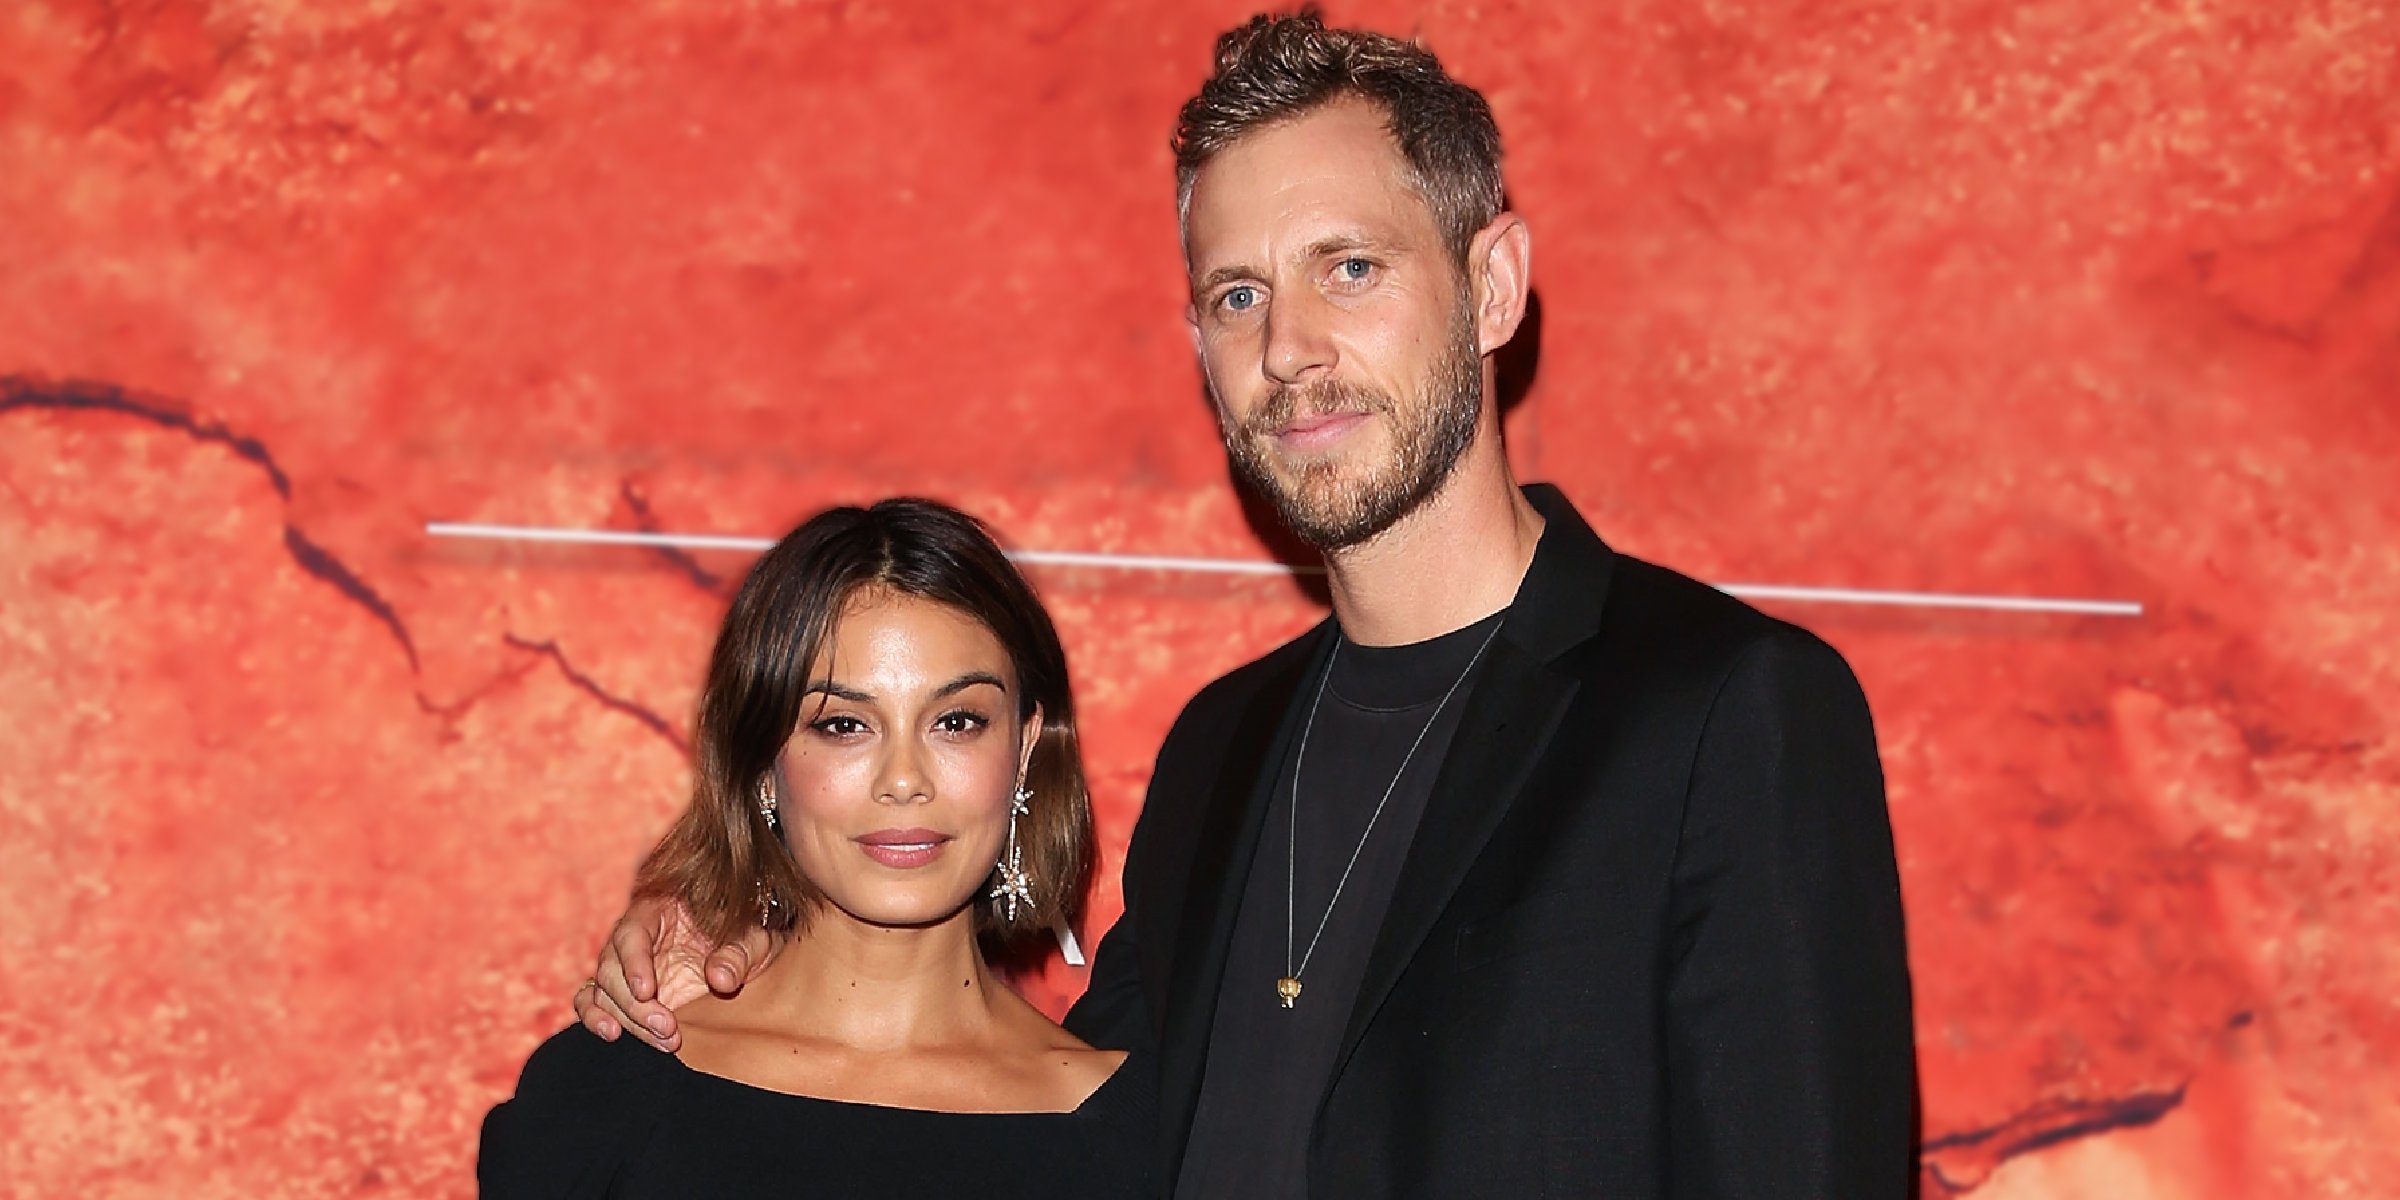 Nathalie Kelley and Jordy Burrows. | Source: Getty Images